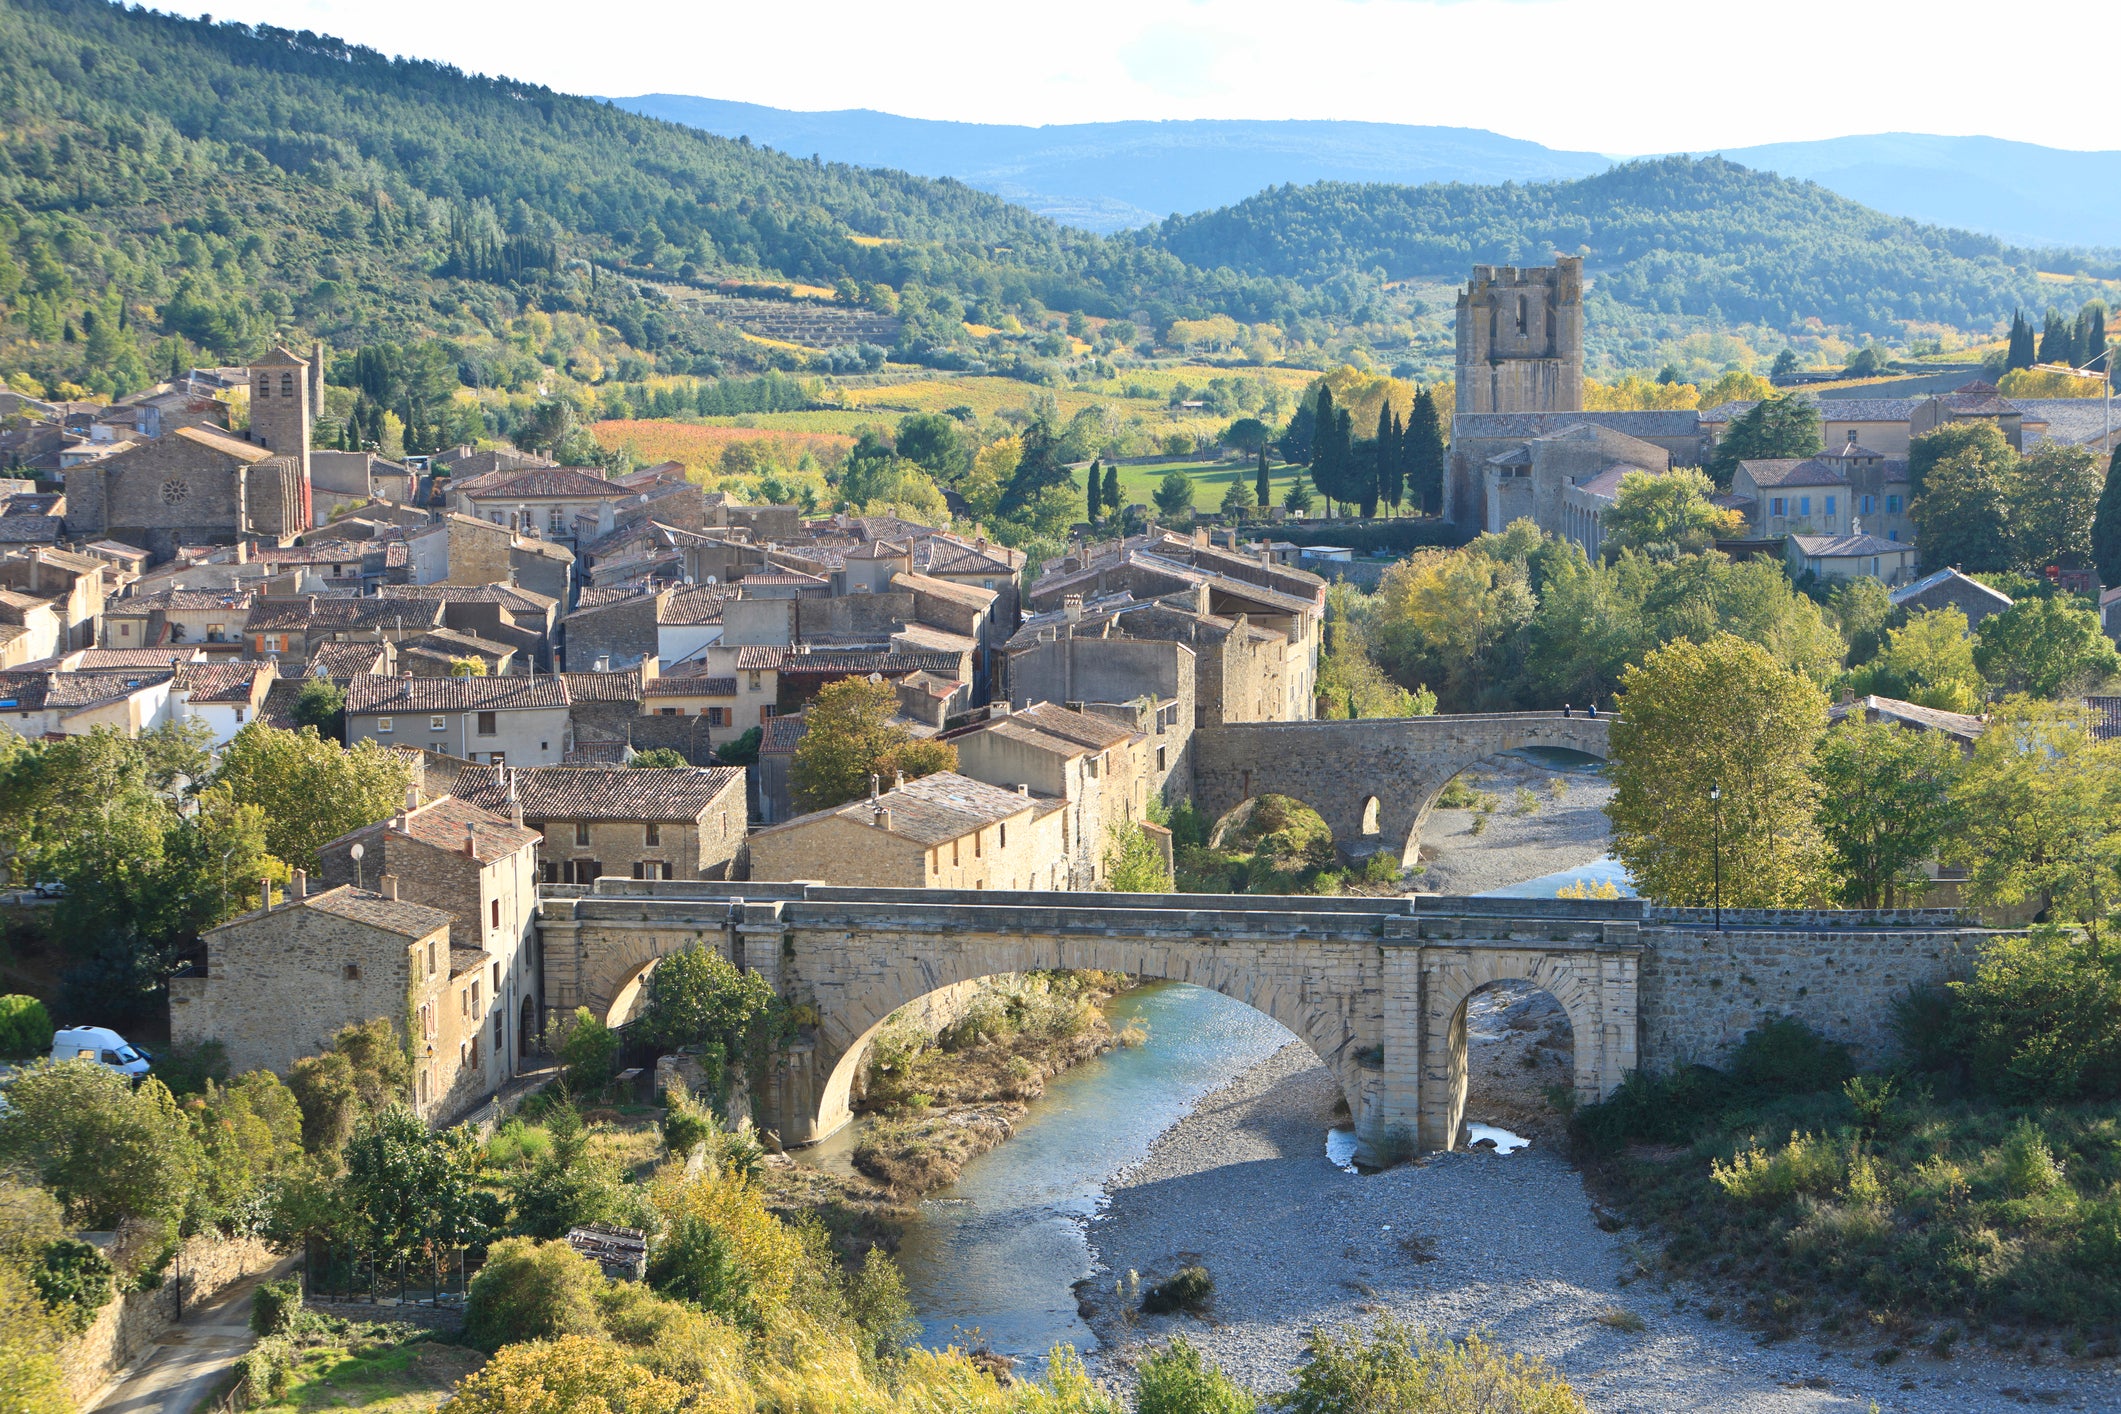 Lagrasse blends beaches with some of the most beautiful villages in France